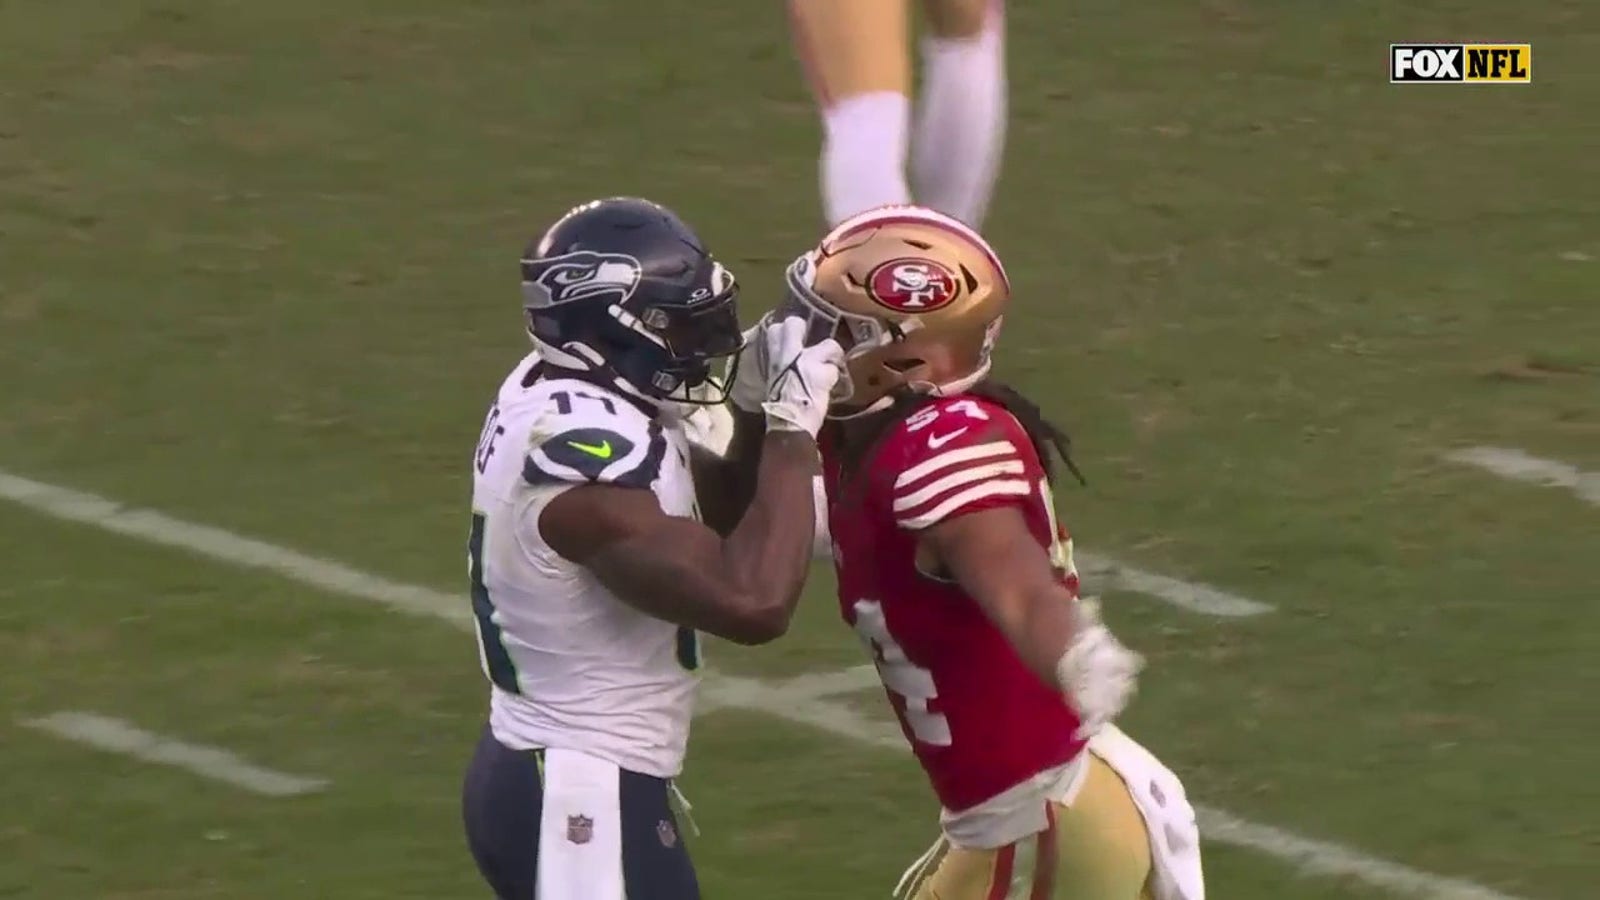 Seahawks' DK Metcalf gets ejected for slamming 49ers' Fred Warner to the ground